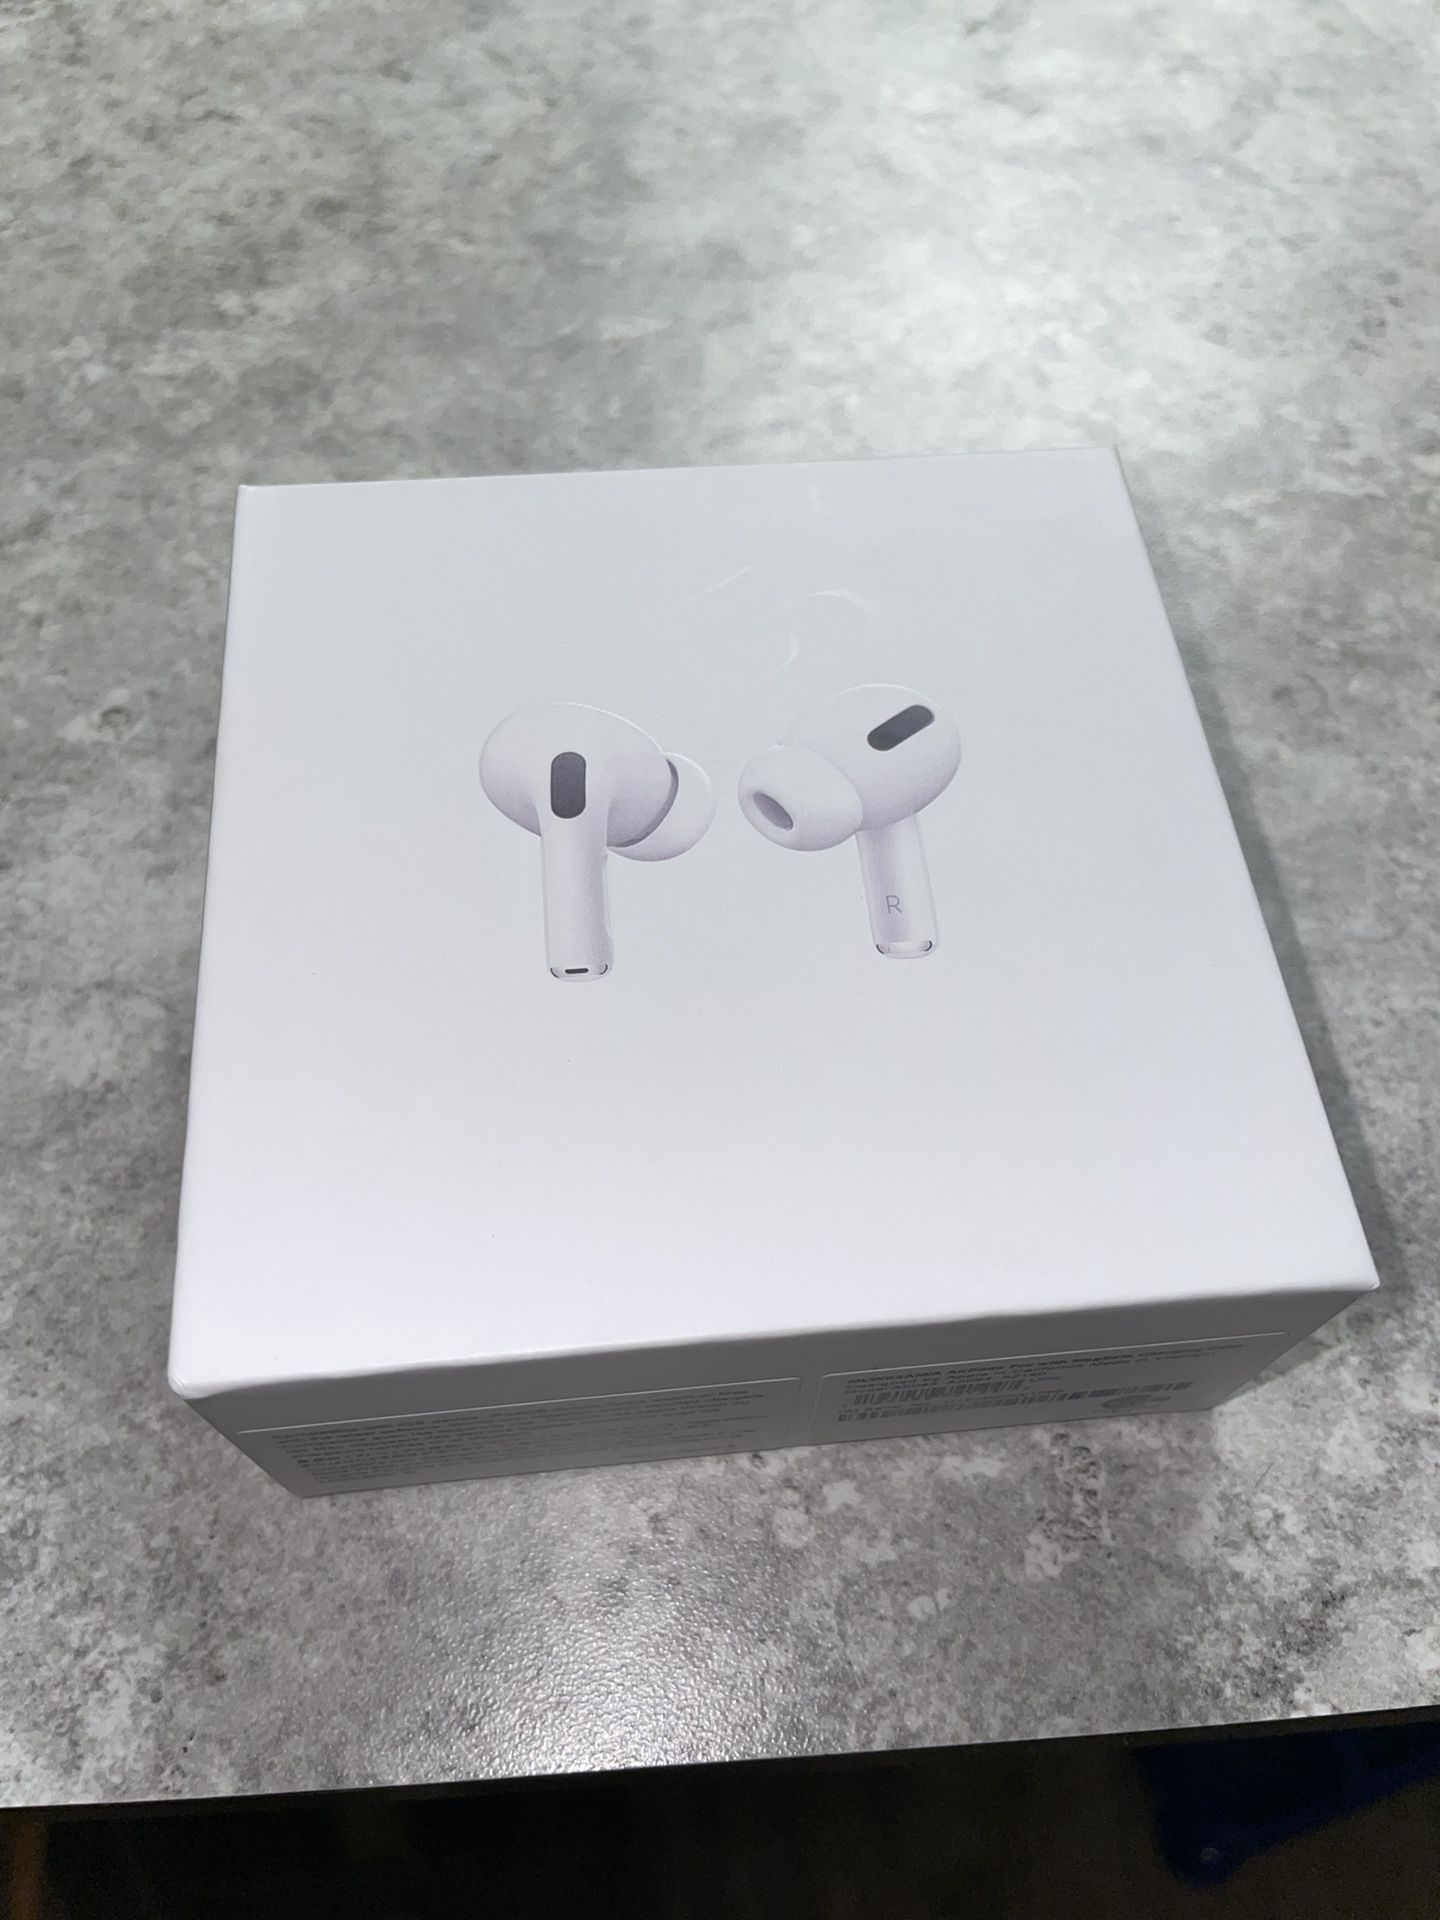 *BEST OFFER* airpods Pro